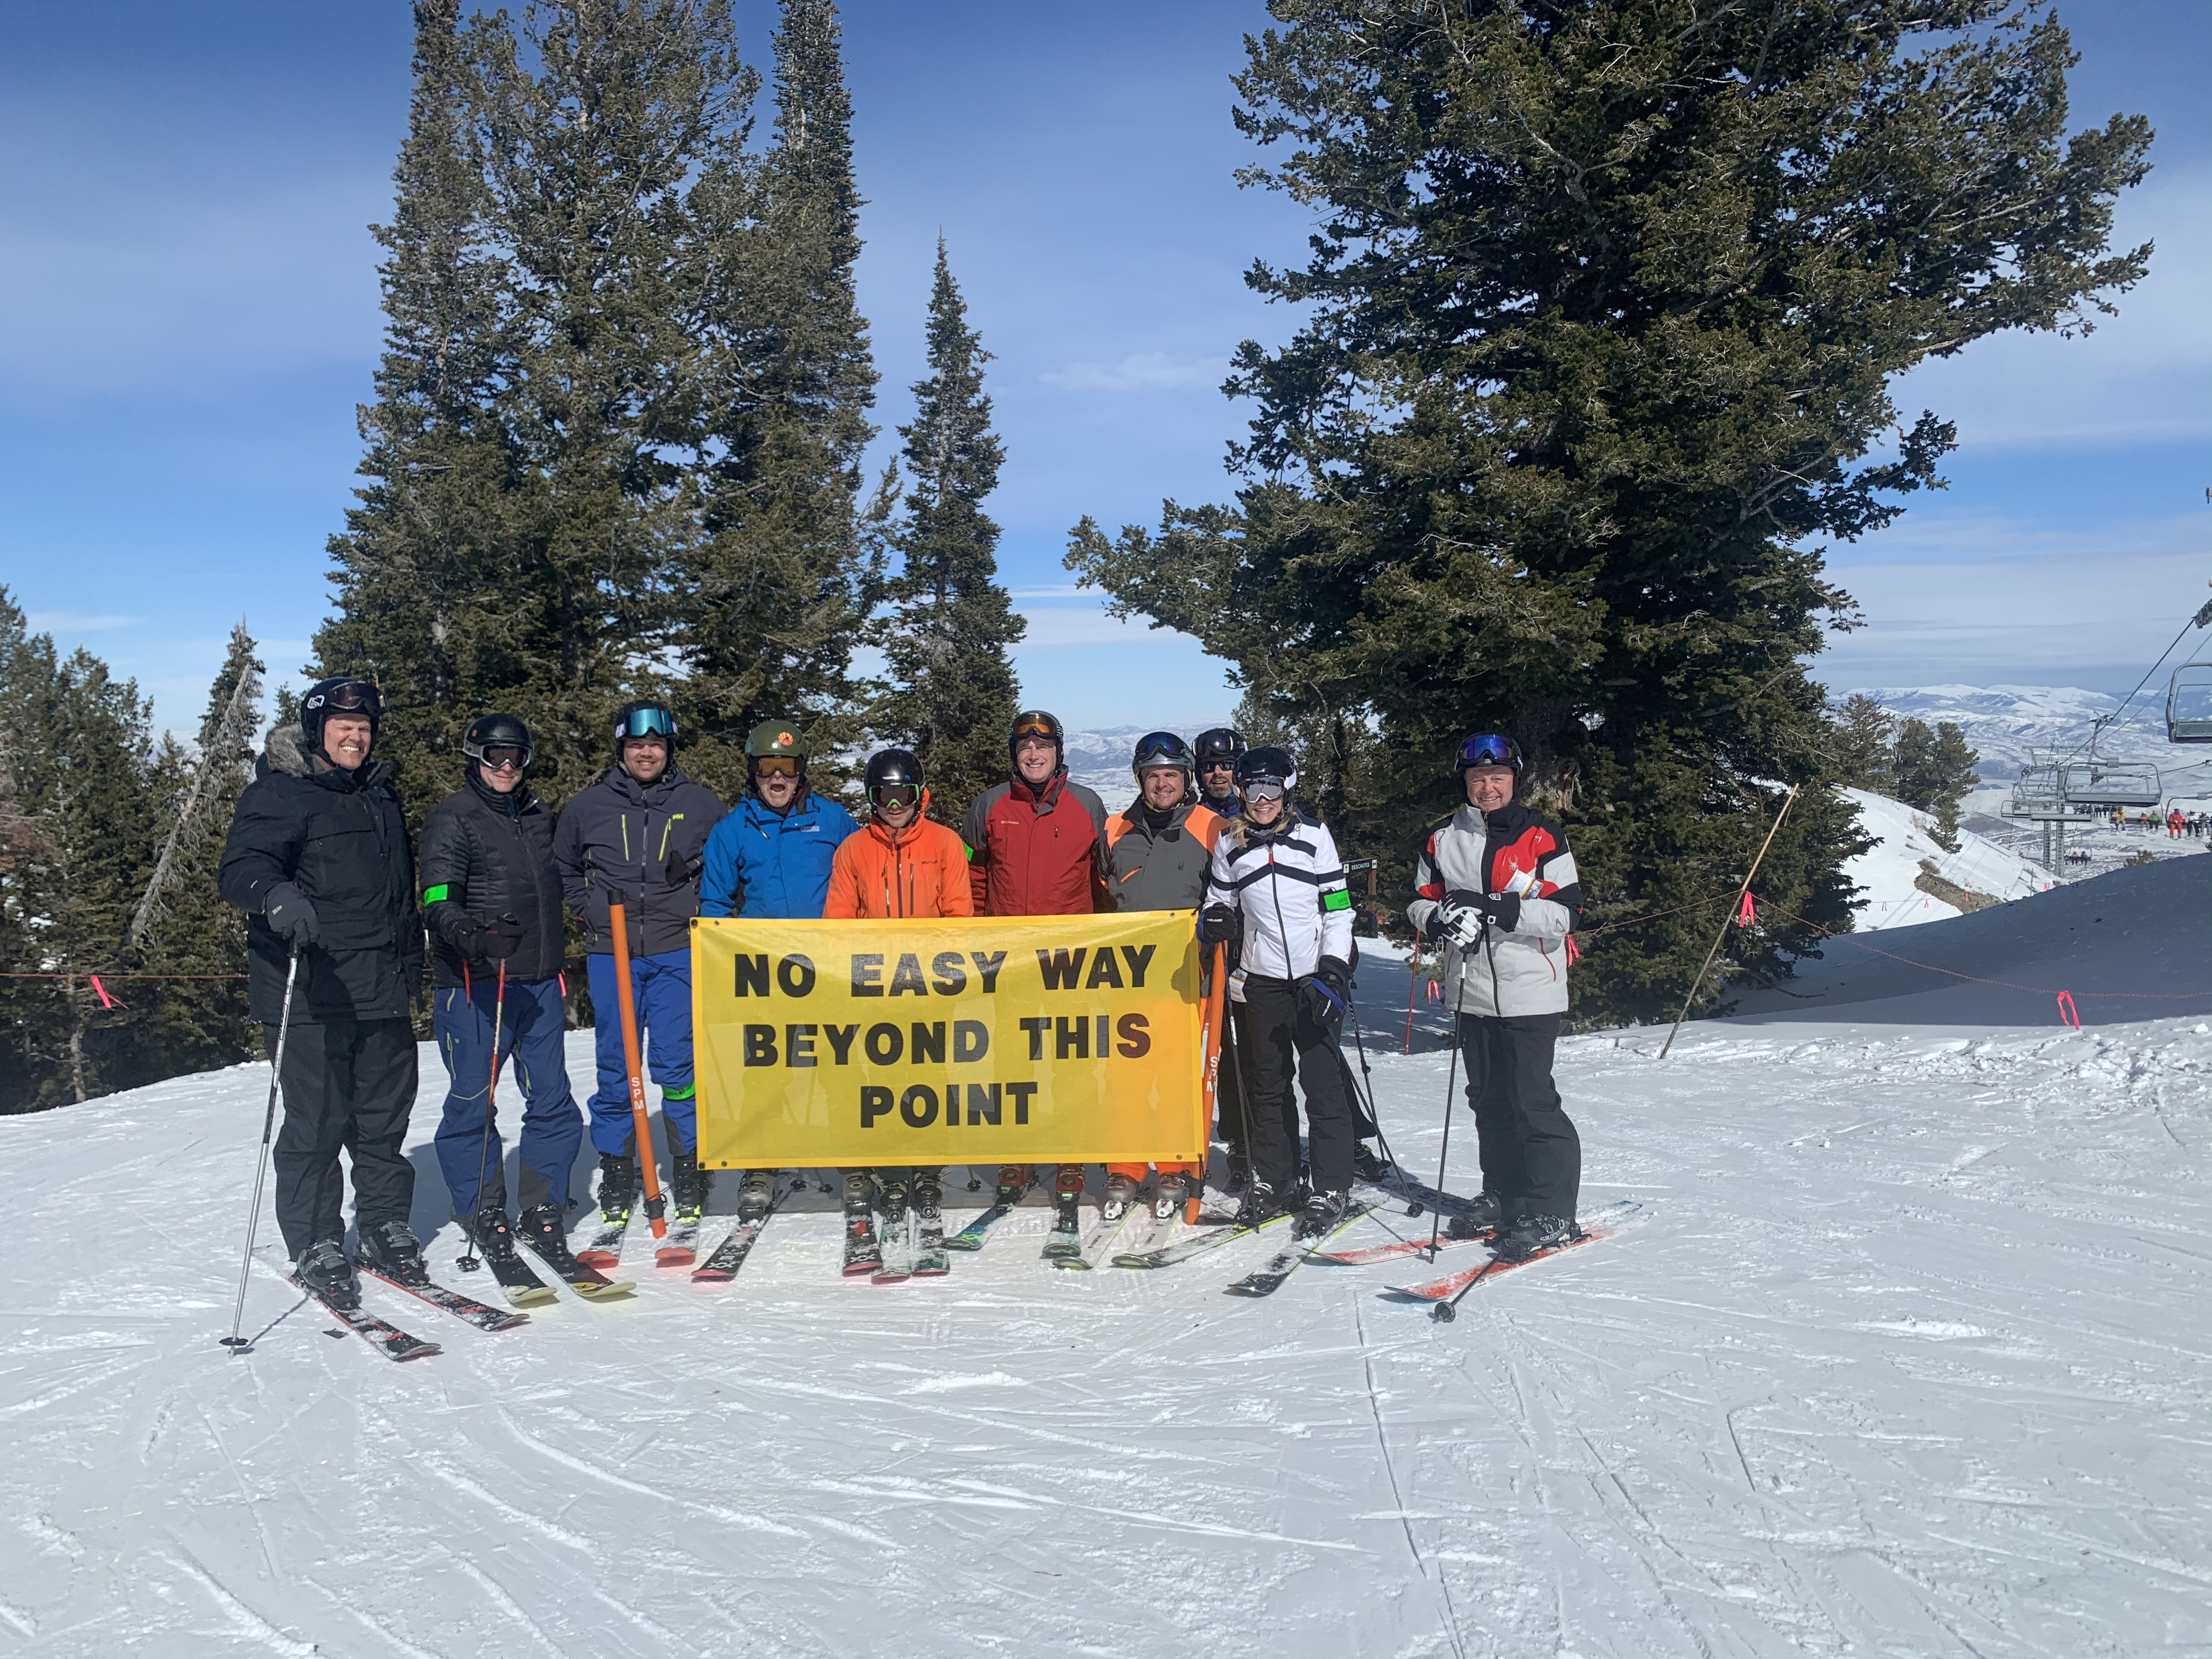 IRHS Group Skiing - No Easy Way Beyond This Point!